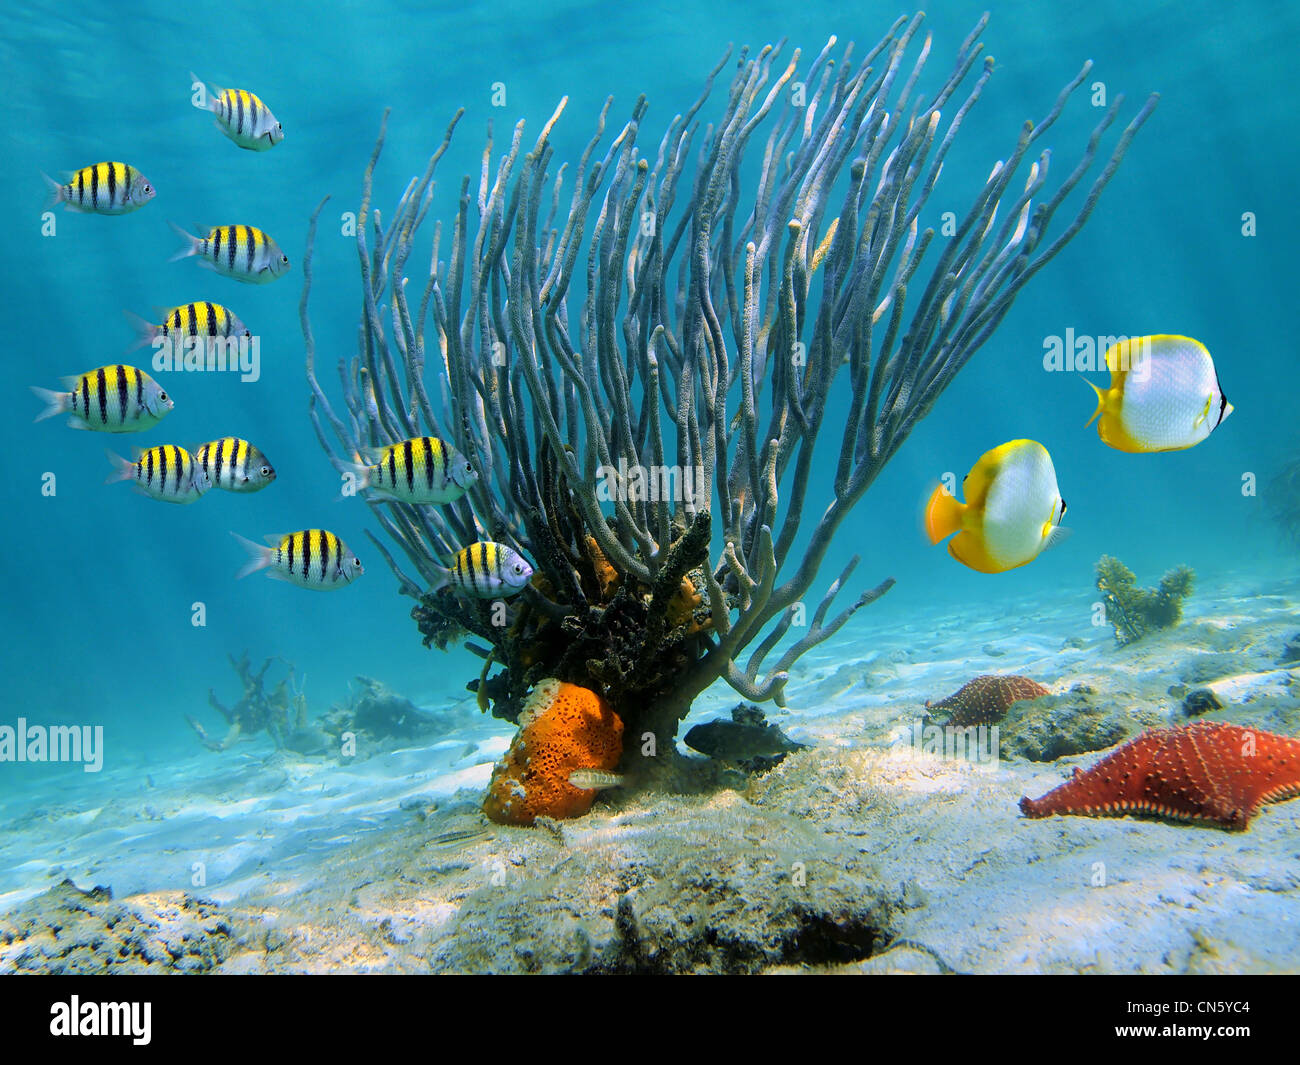 Sea rod coral on sandy seabed with colorful tropical fish underwater sea, Caribbean, Dominican Republic Stock Photo